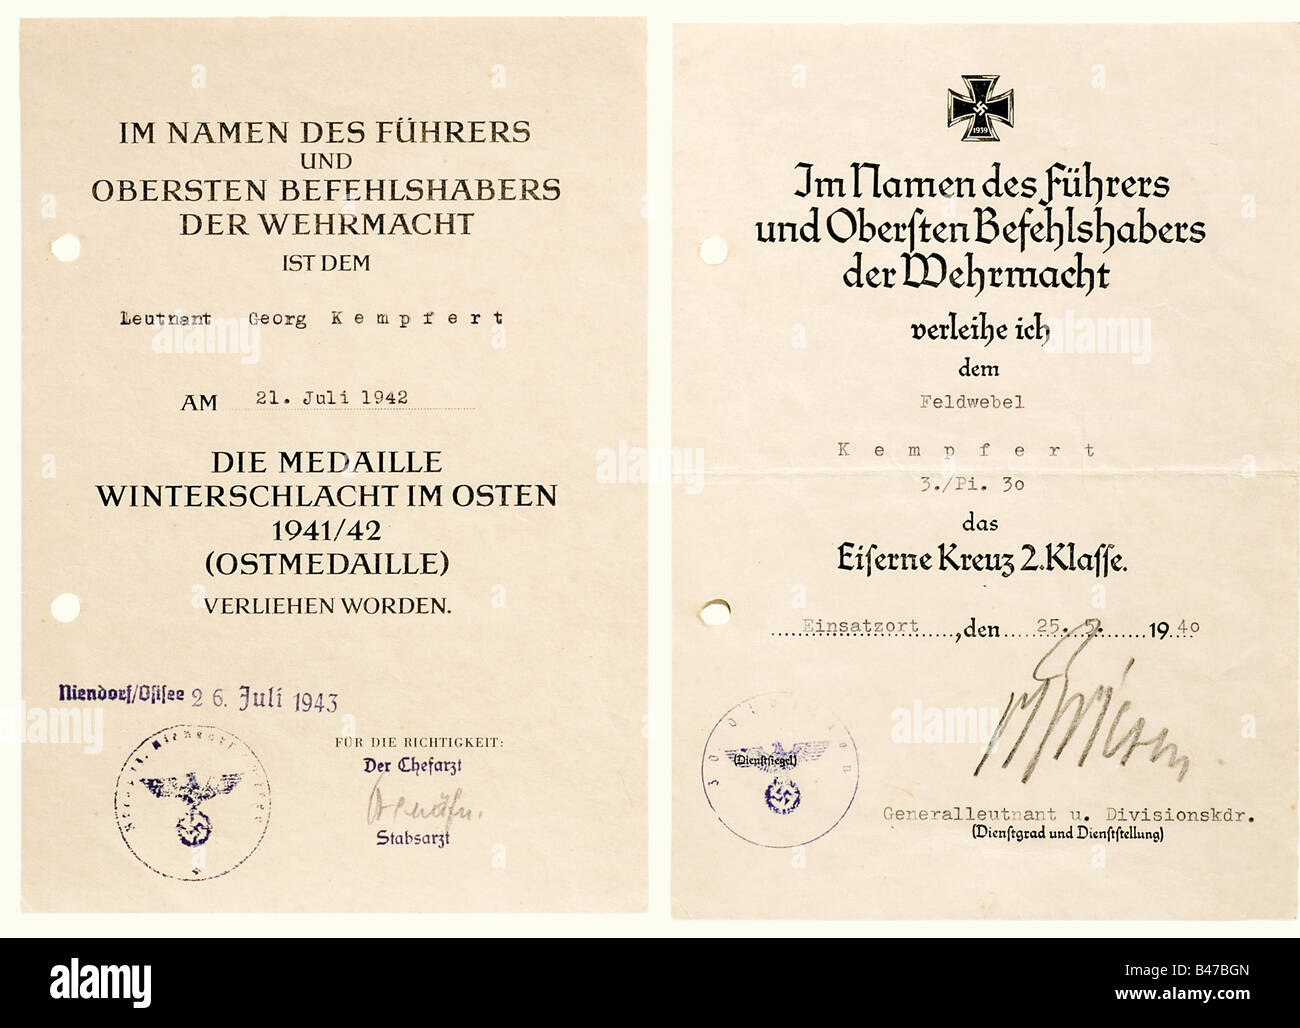 Georg Kempfert, Lieutenant in Pioneer Battalions 30 and 743, award documents and possession certificates Award documents for the Iron Cross of 1939 2nd and 1st Classes, dated 25 May 1940 (original pencil signature v. Briesen) and 17 January 1942 (original signature v. Tippelskirch) respectively, typed possession certificates for the General Assault Badge 1 December 1941 with original signature v. Tippelskirch in coloured pencil and Close Combat Clasp 1st Class 22 September 1943, document for the Eastern Front Medal 26 July 1943, possession certificates for the , Stock Photo